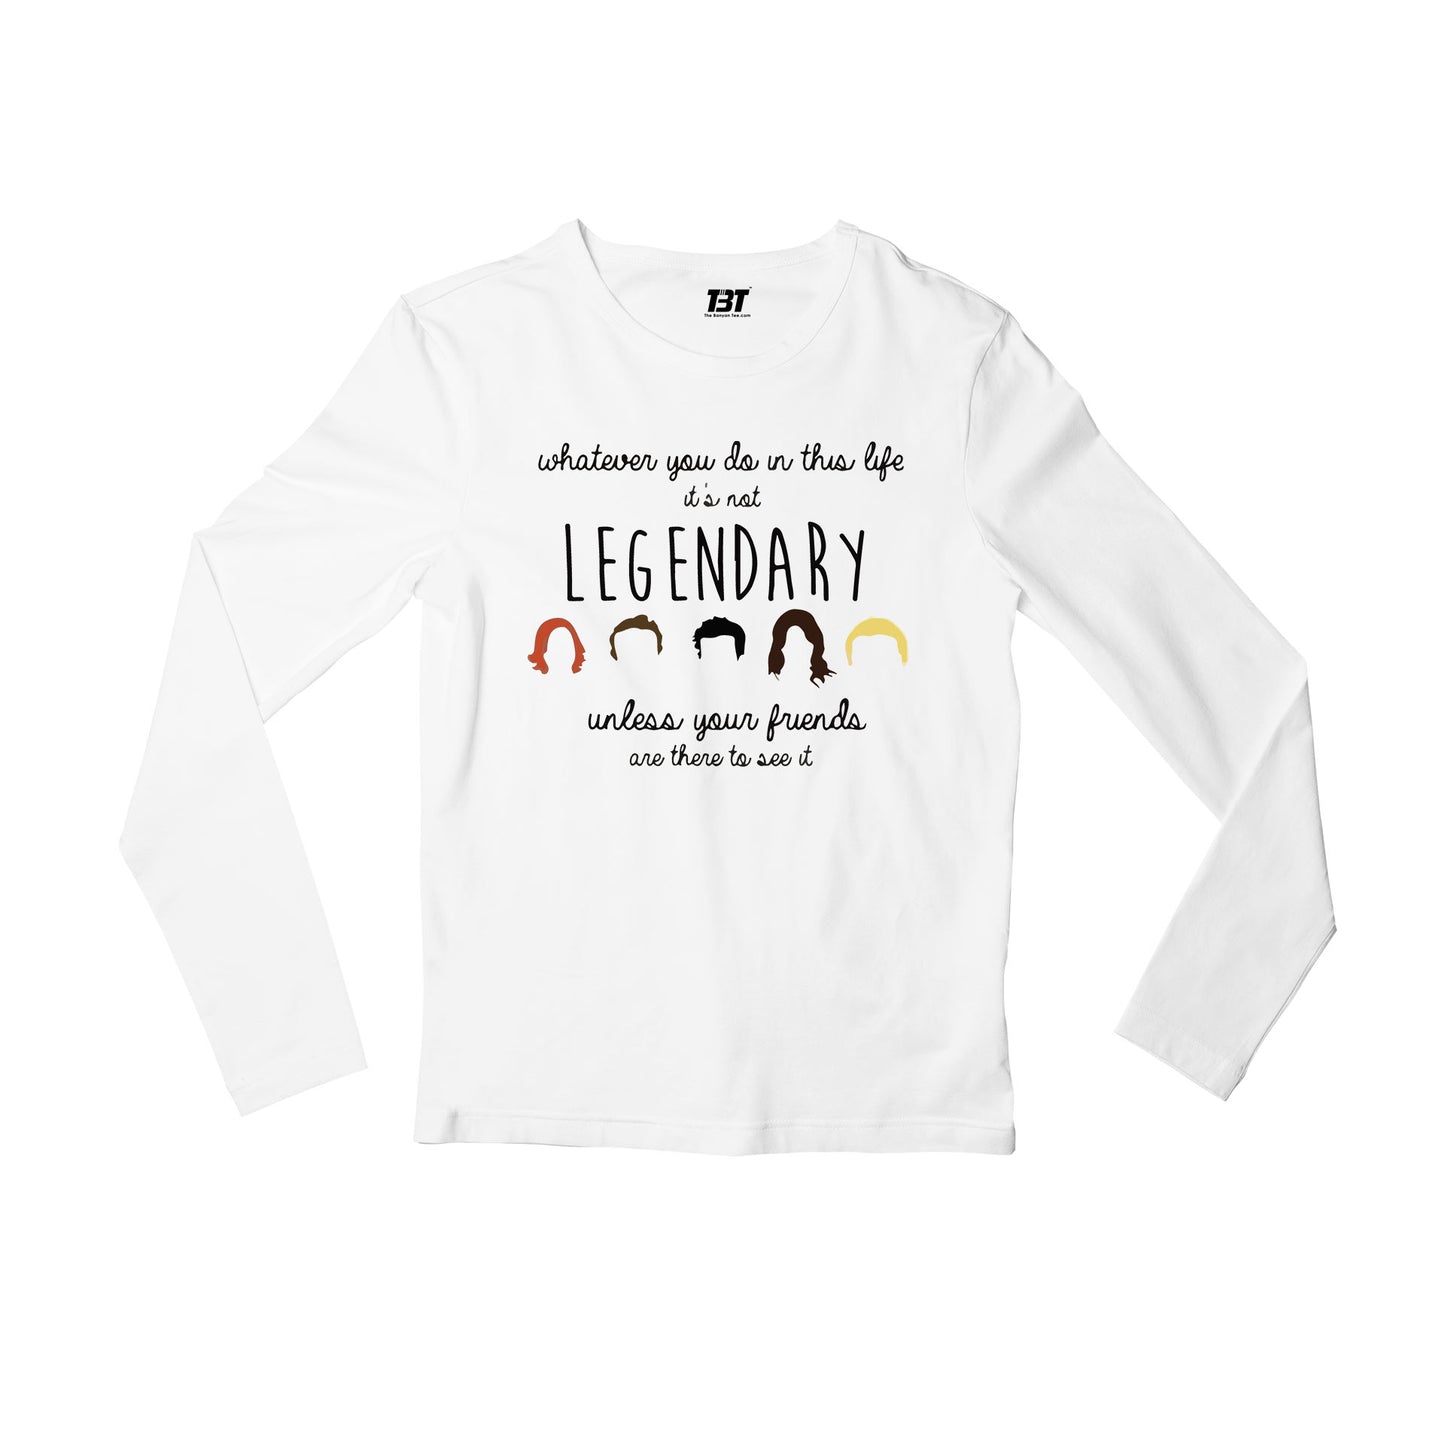 How I Met Your Mother Full Sleeves T-shirt - Legendary Full Sleeves T-shirt The Banyan Tee TBT